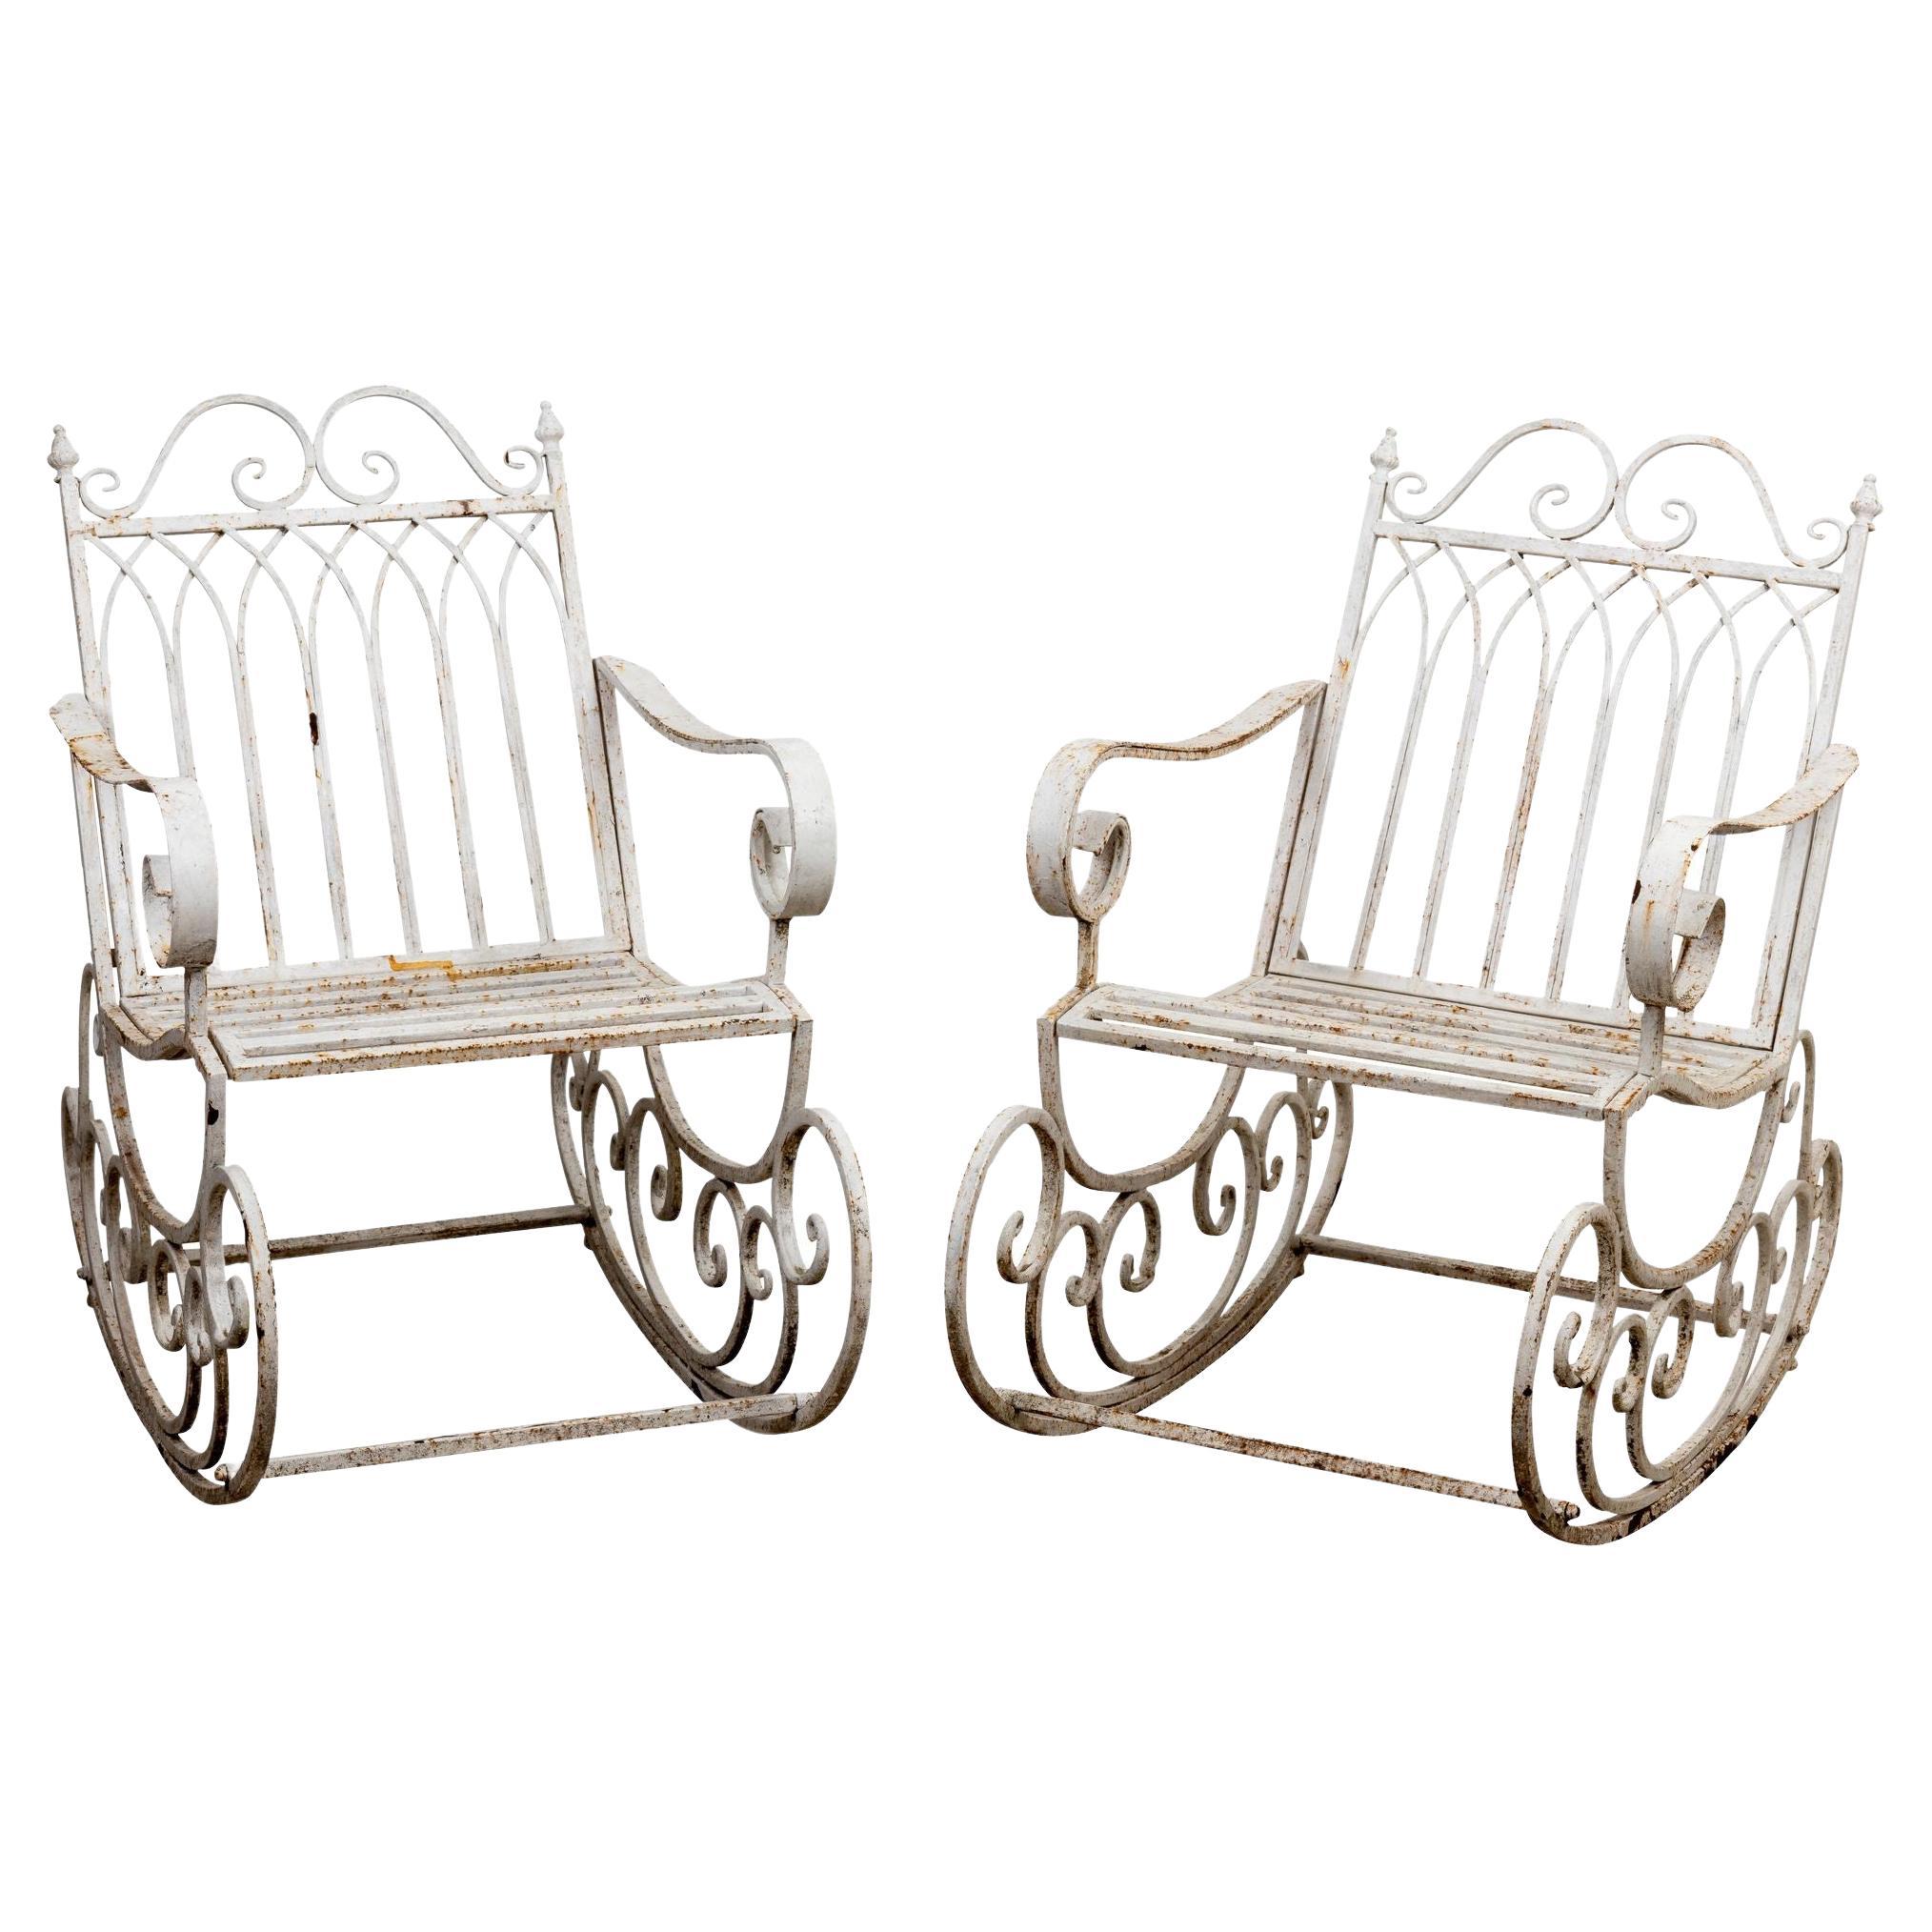 Pair of White Painted Garden Rocking Chairs